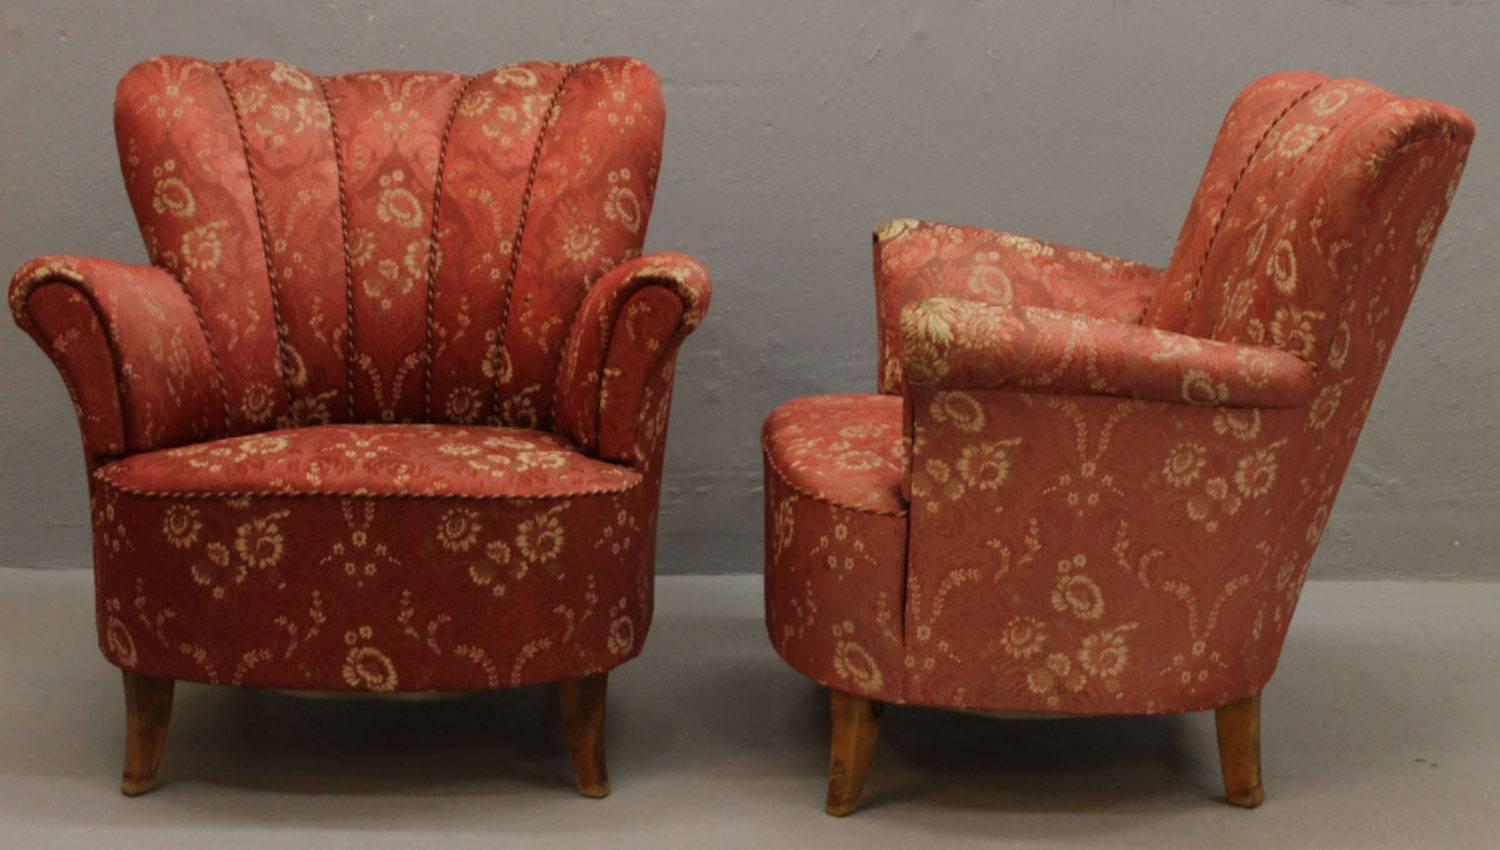 Pair of Danish modern lounge chairs, the pair with channelled backs, in the original upholstery from the 1940s. Minor wear on the fabric on the arms. Comfortable and very solid chairs